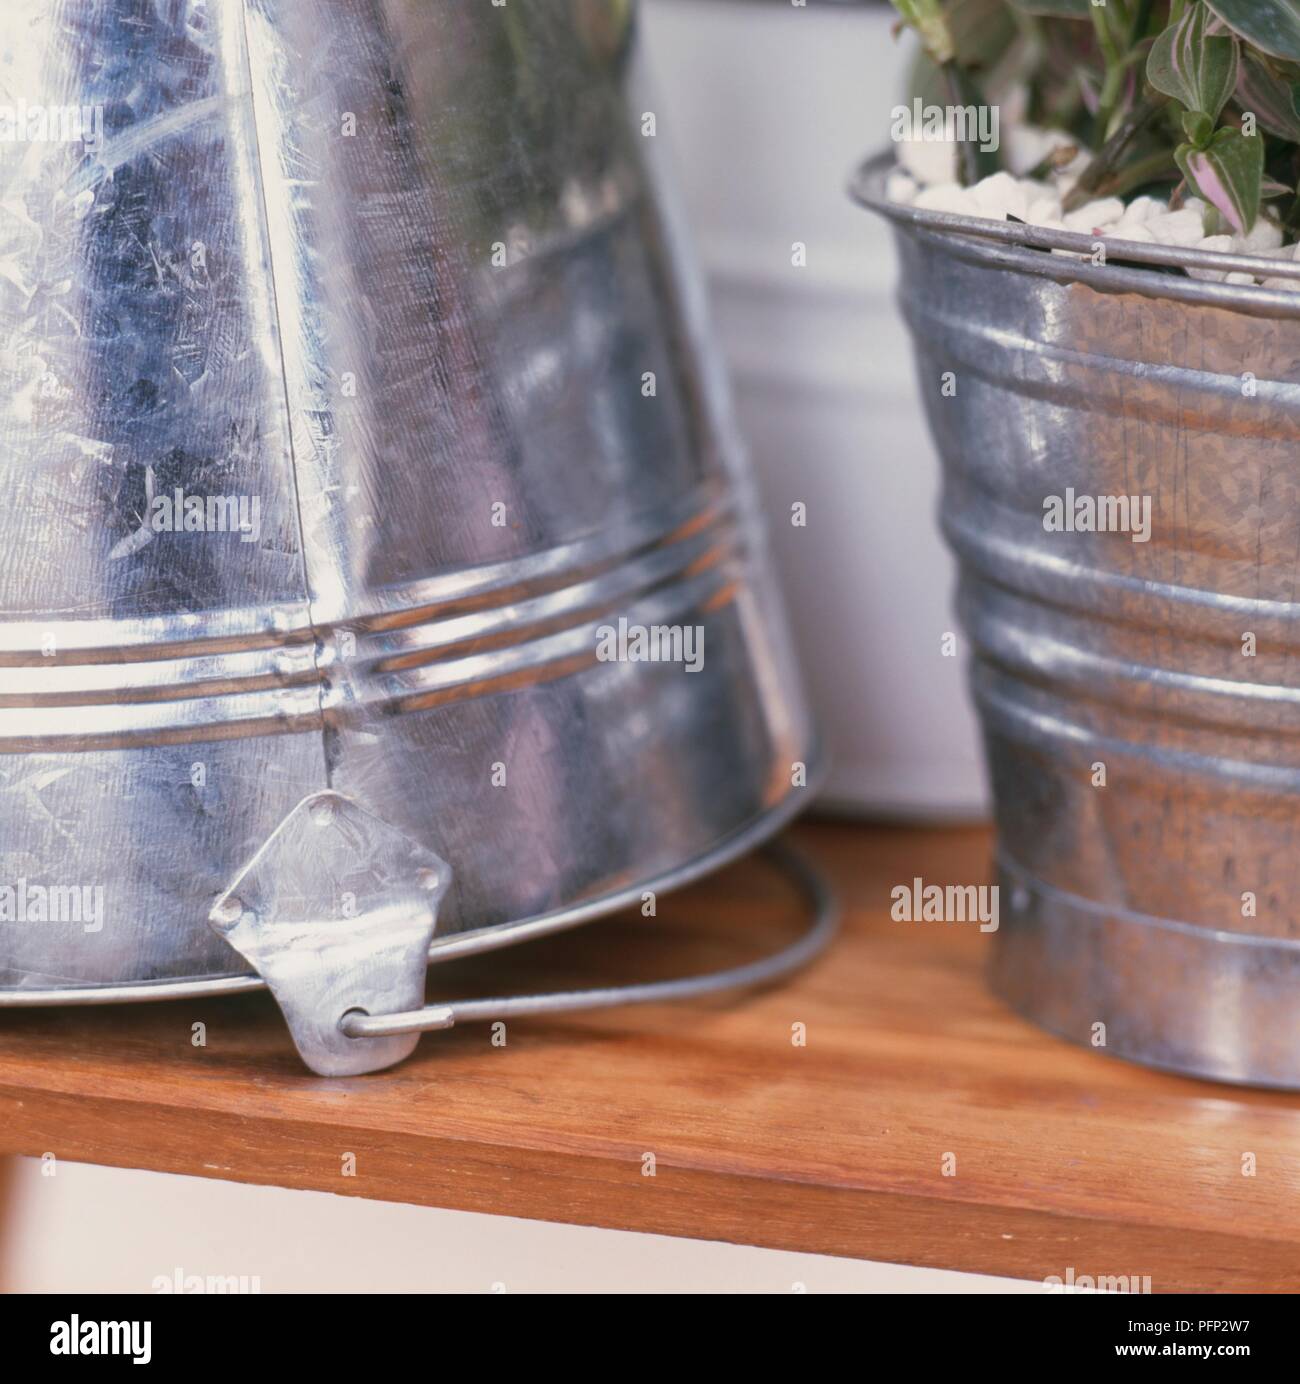 Galvanized and enamelled buckets, one turned upside down and the other containing a houseplant, close-up Stock Photo